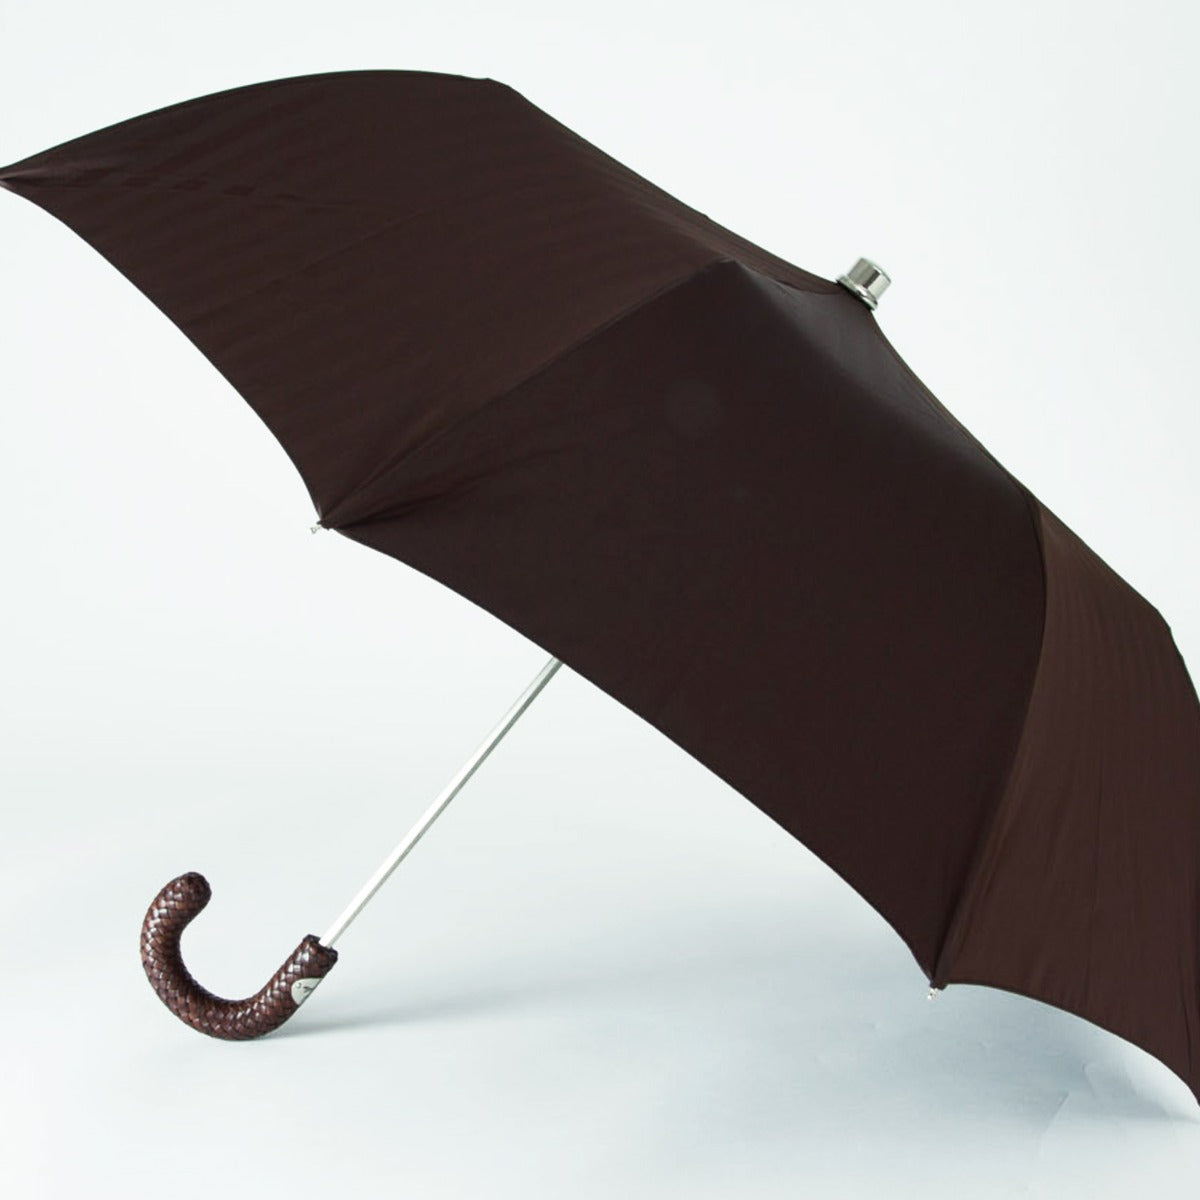 A handcrafted Brown Herringbone Canopy Travel Umbrella with a woven leather handle on a white background by KirbyAllison.com.